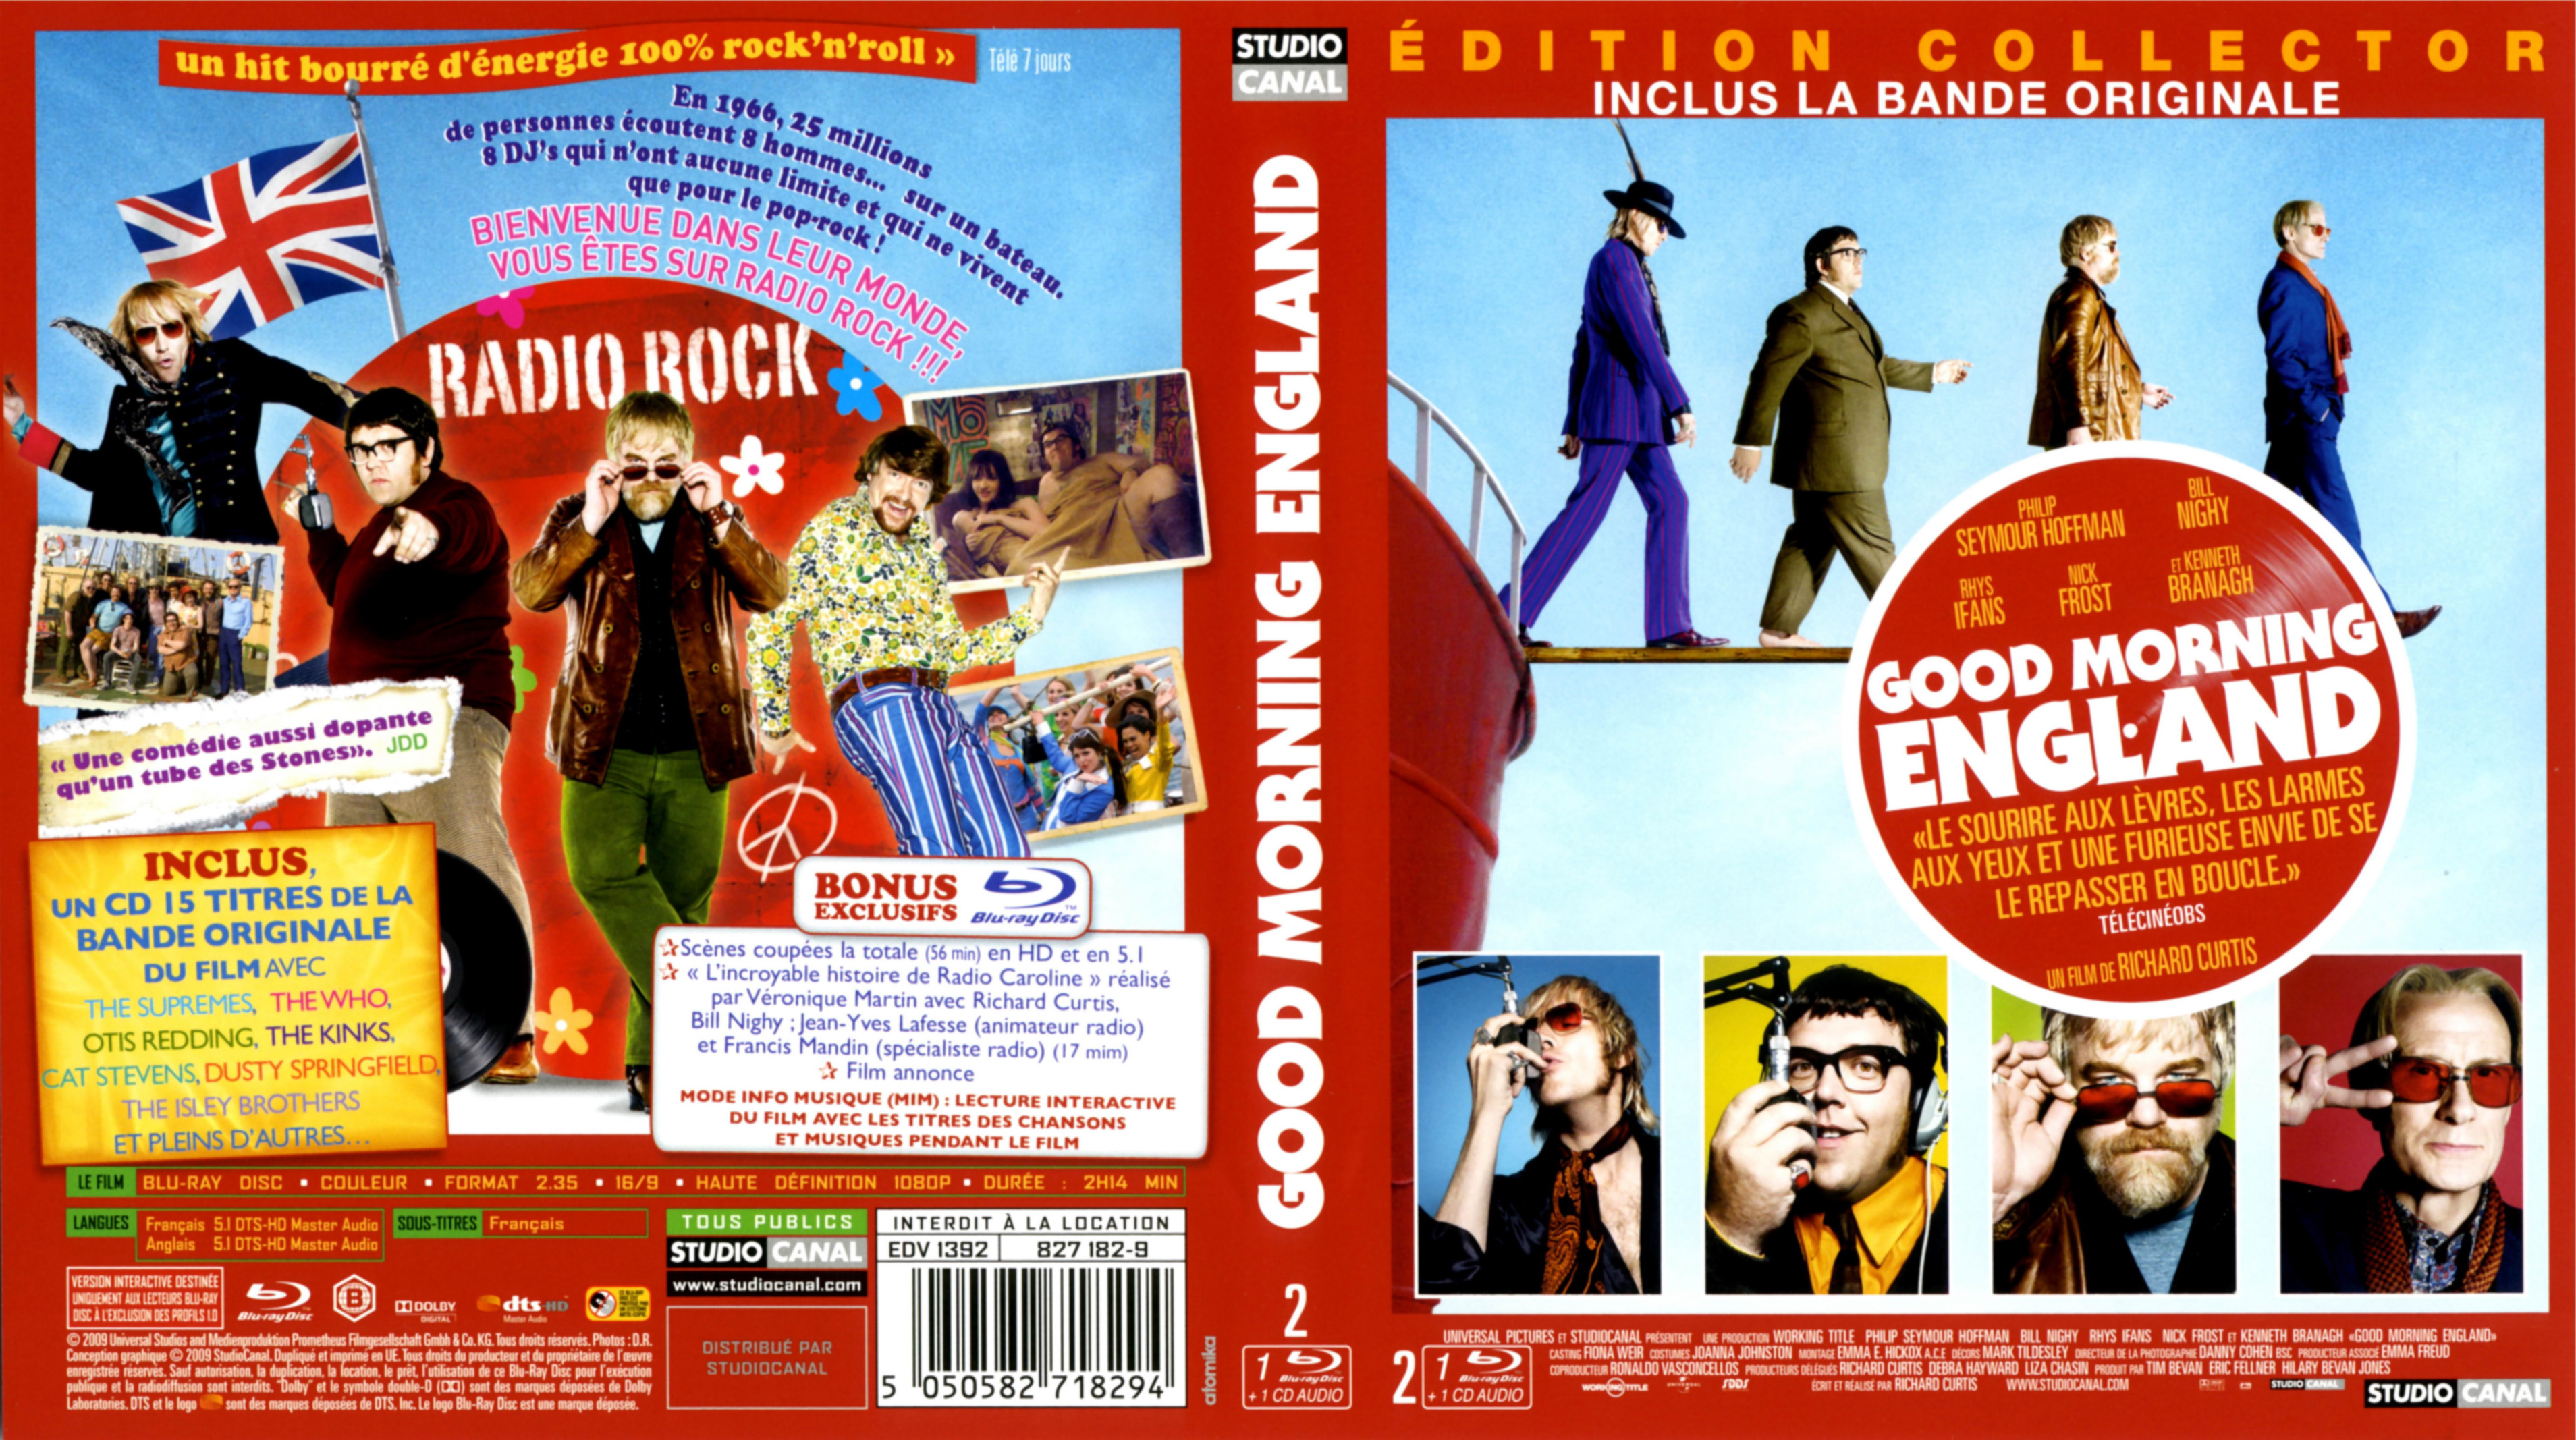 Jaquette DVD Good morning england (BLU-RAY)